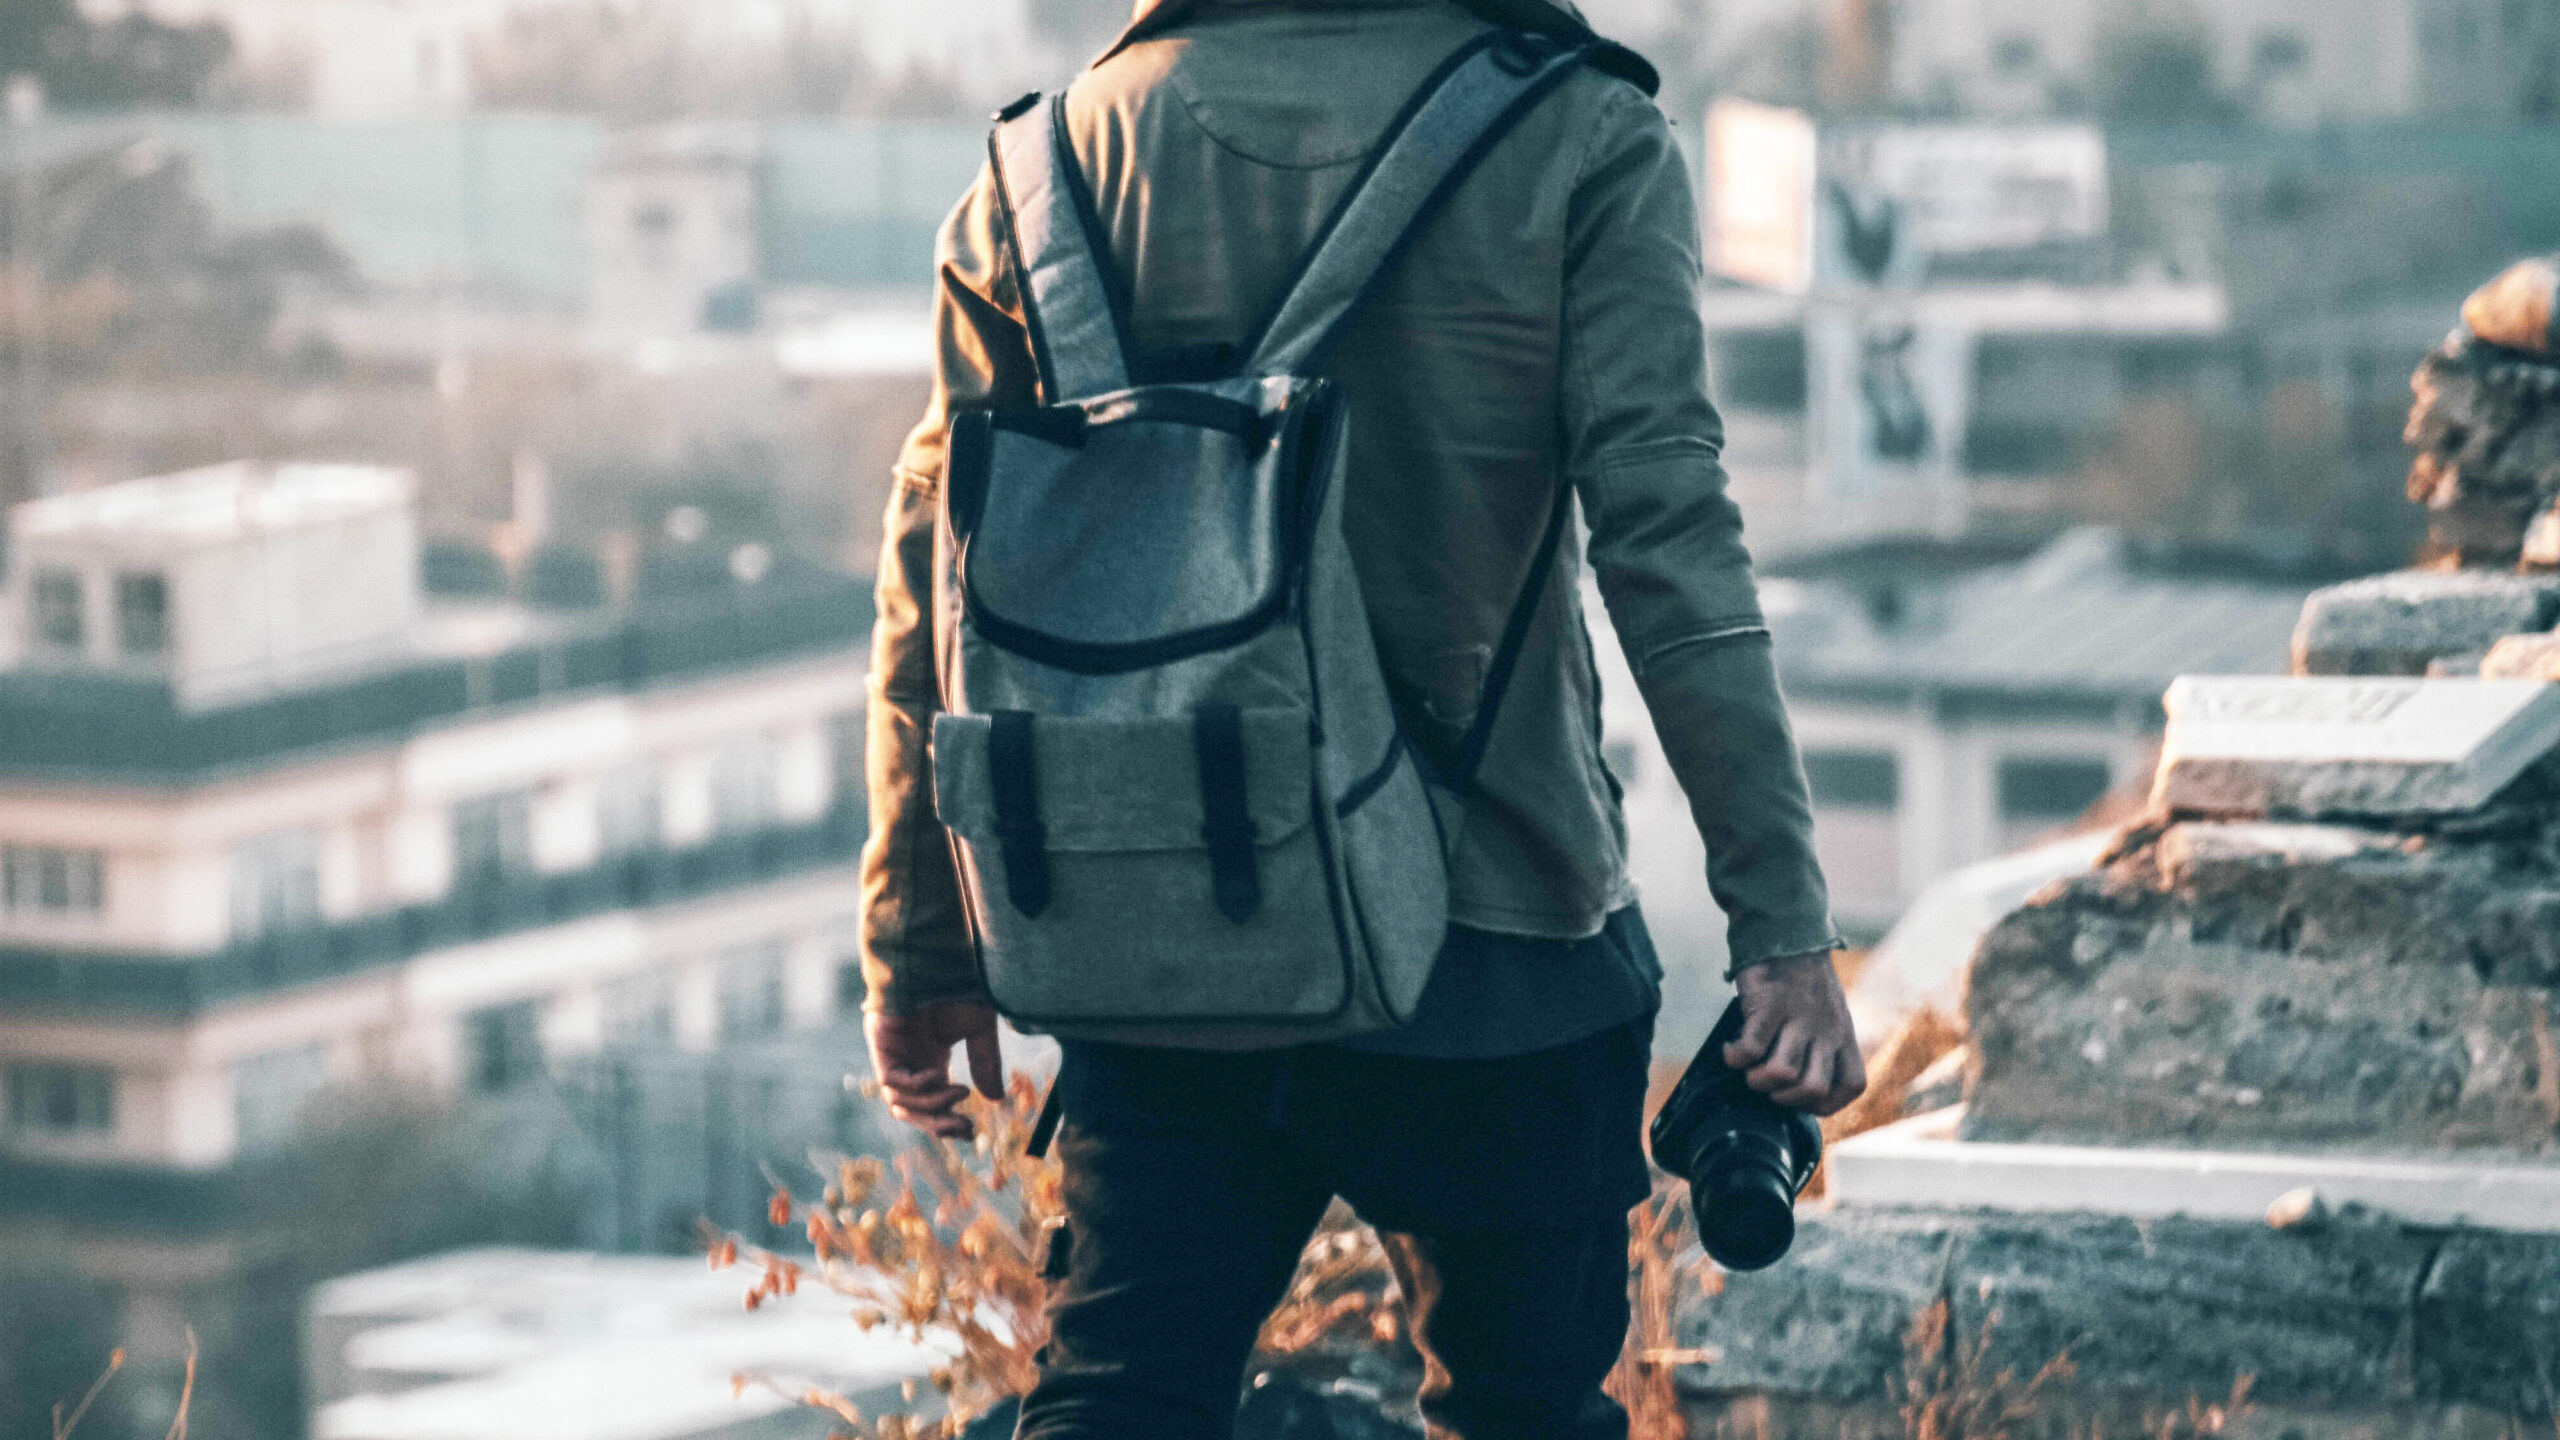 Best Camera Bags 2023: Reviews and Buying Guide